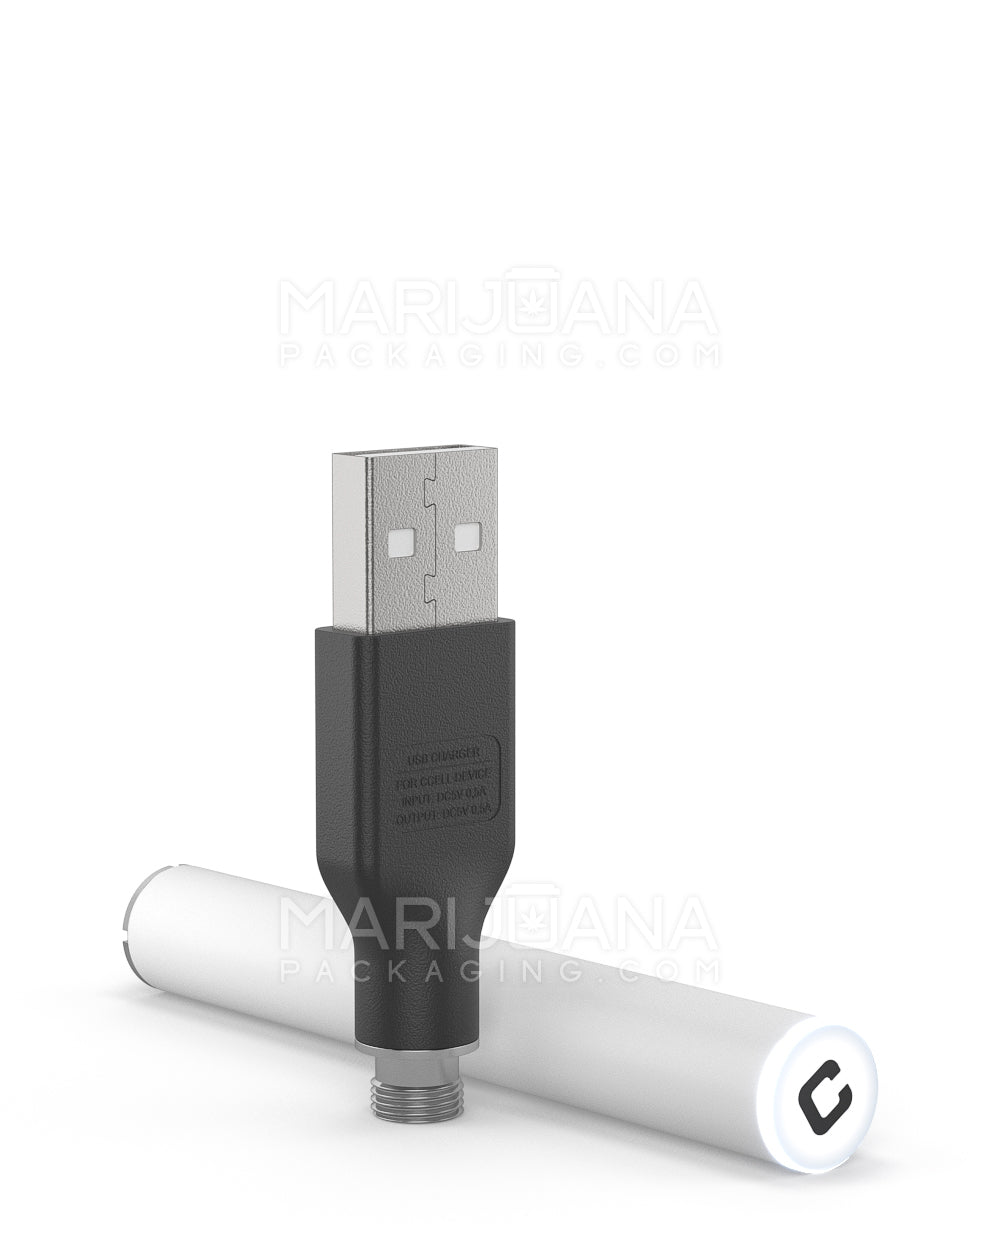 CCELL | M3 Vape Batteries with USB Charger | 340mAh - White - 100 Count